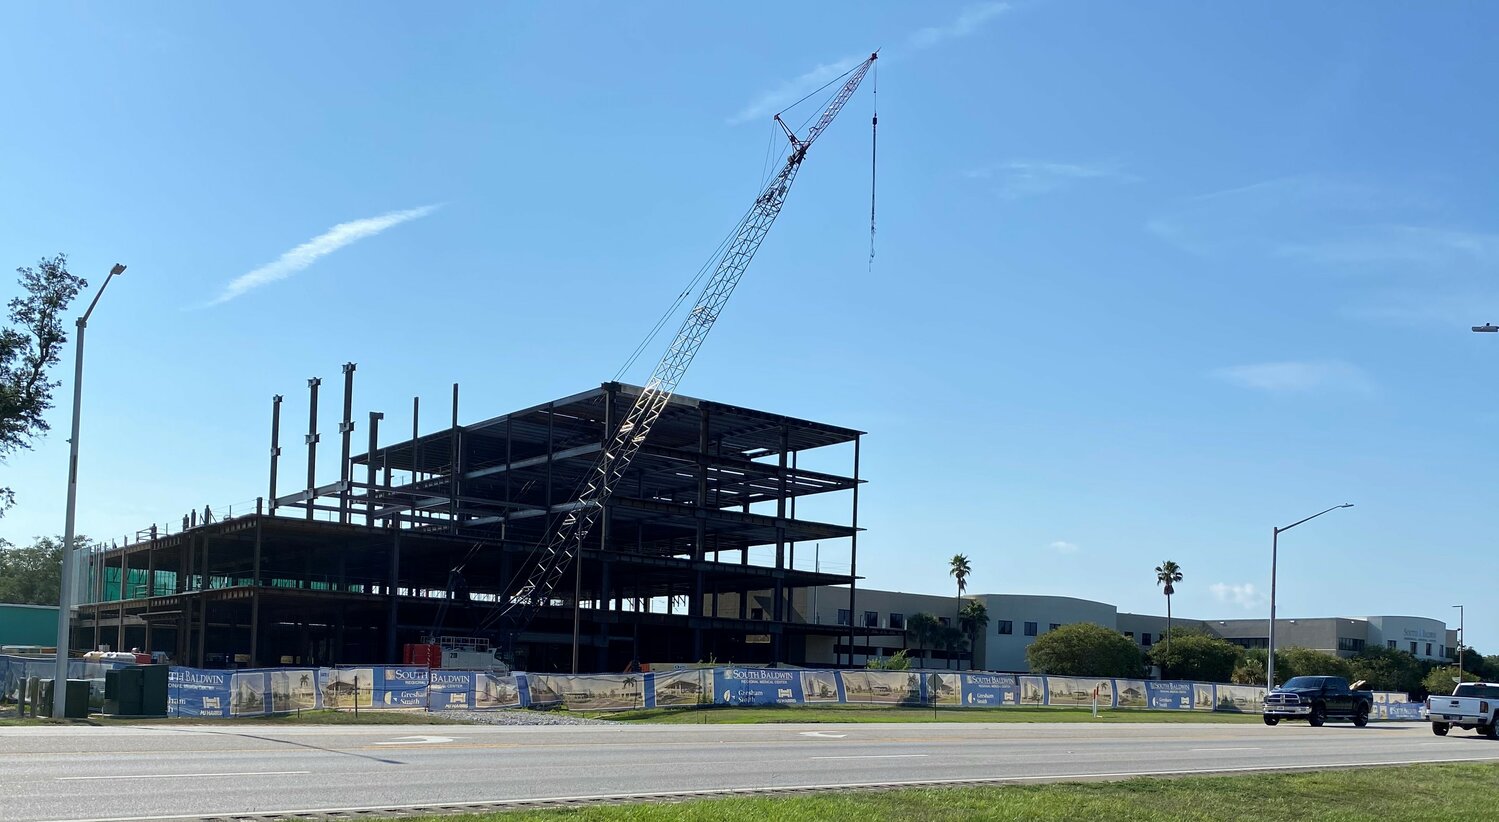 Construction continues for the $200 million expansion of the South Baldwin Regional Medical Center. The hospital will be the center of Foley’s new Medical Overlay District.